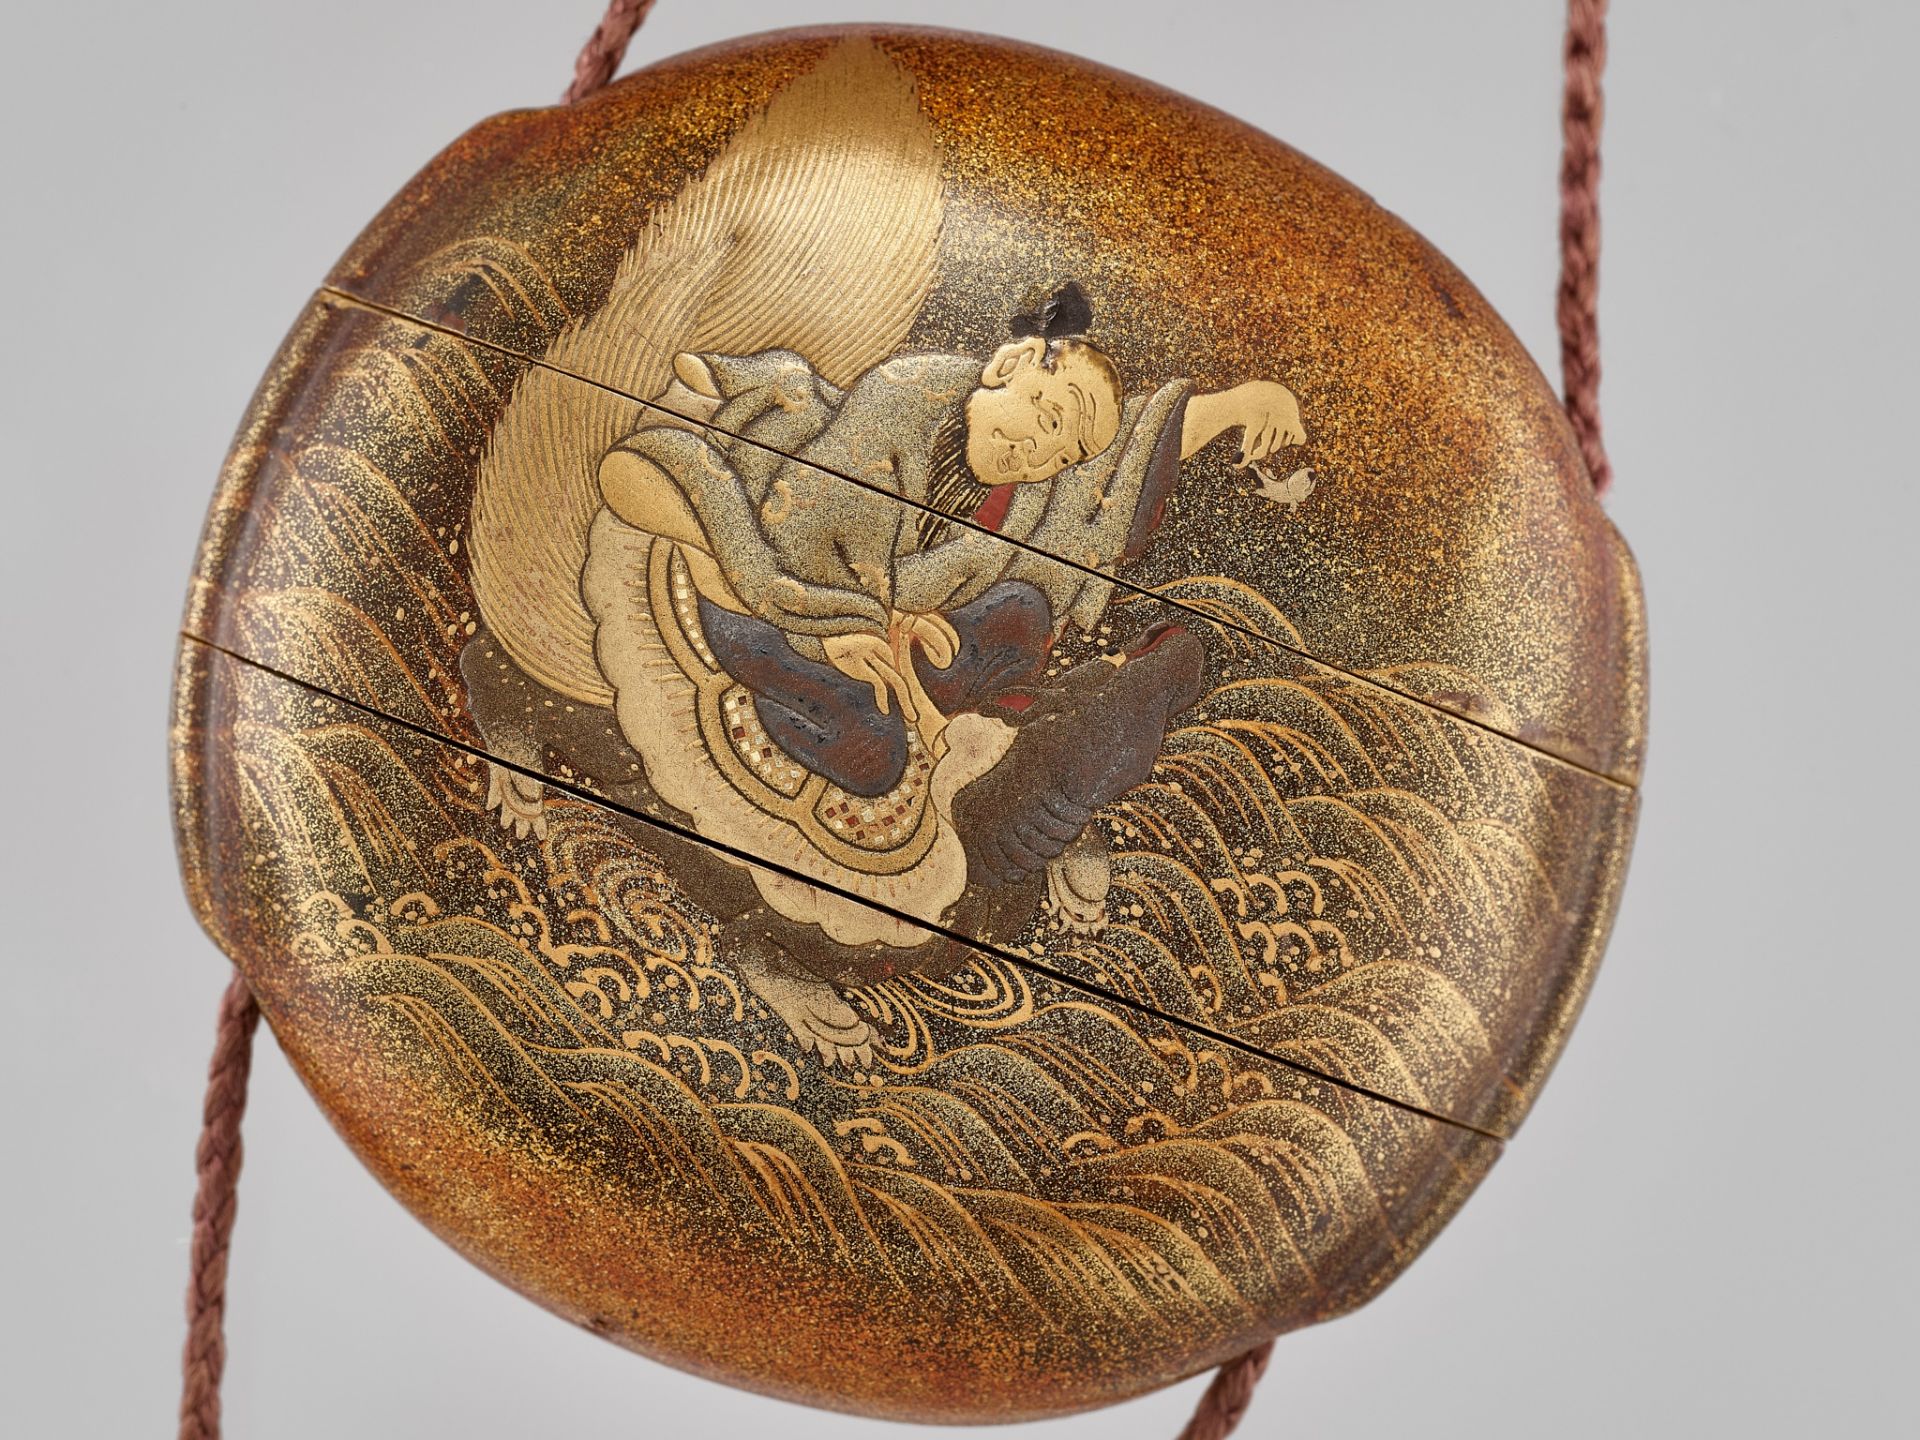 A RARE TWO-CASE LACQUER INRO DEPICTING THE IMMORTAL ROKO RIDING A MINOGAME - Image 3 of 9